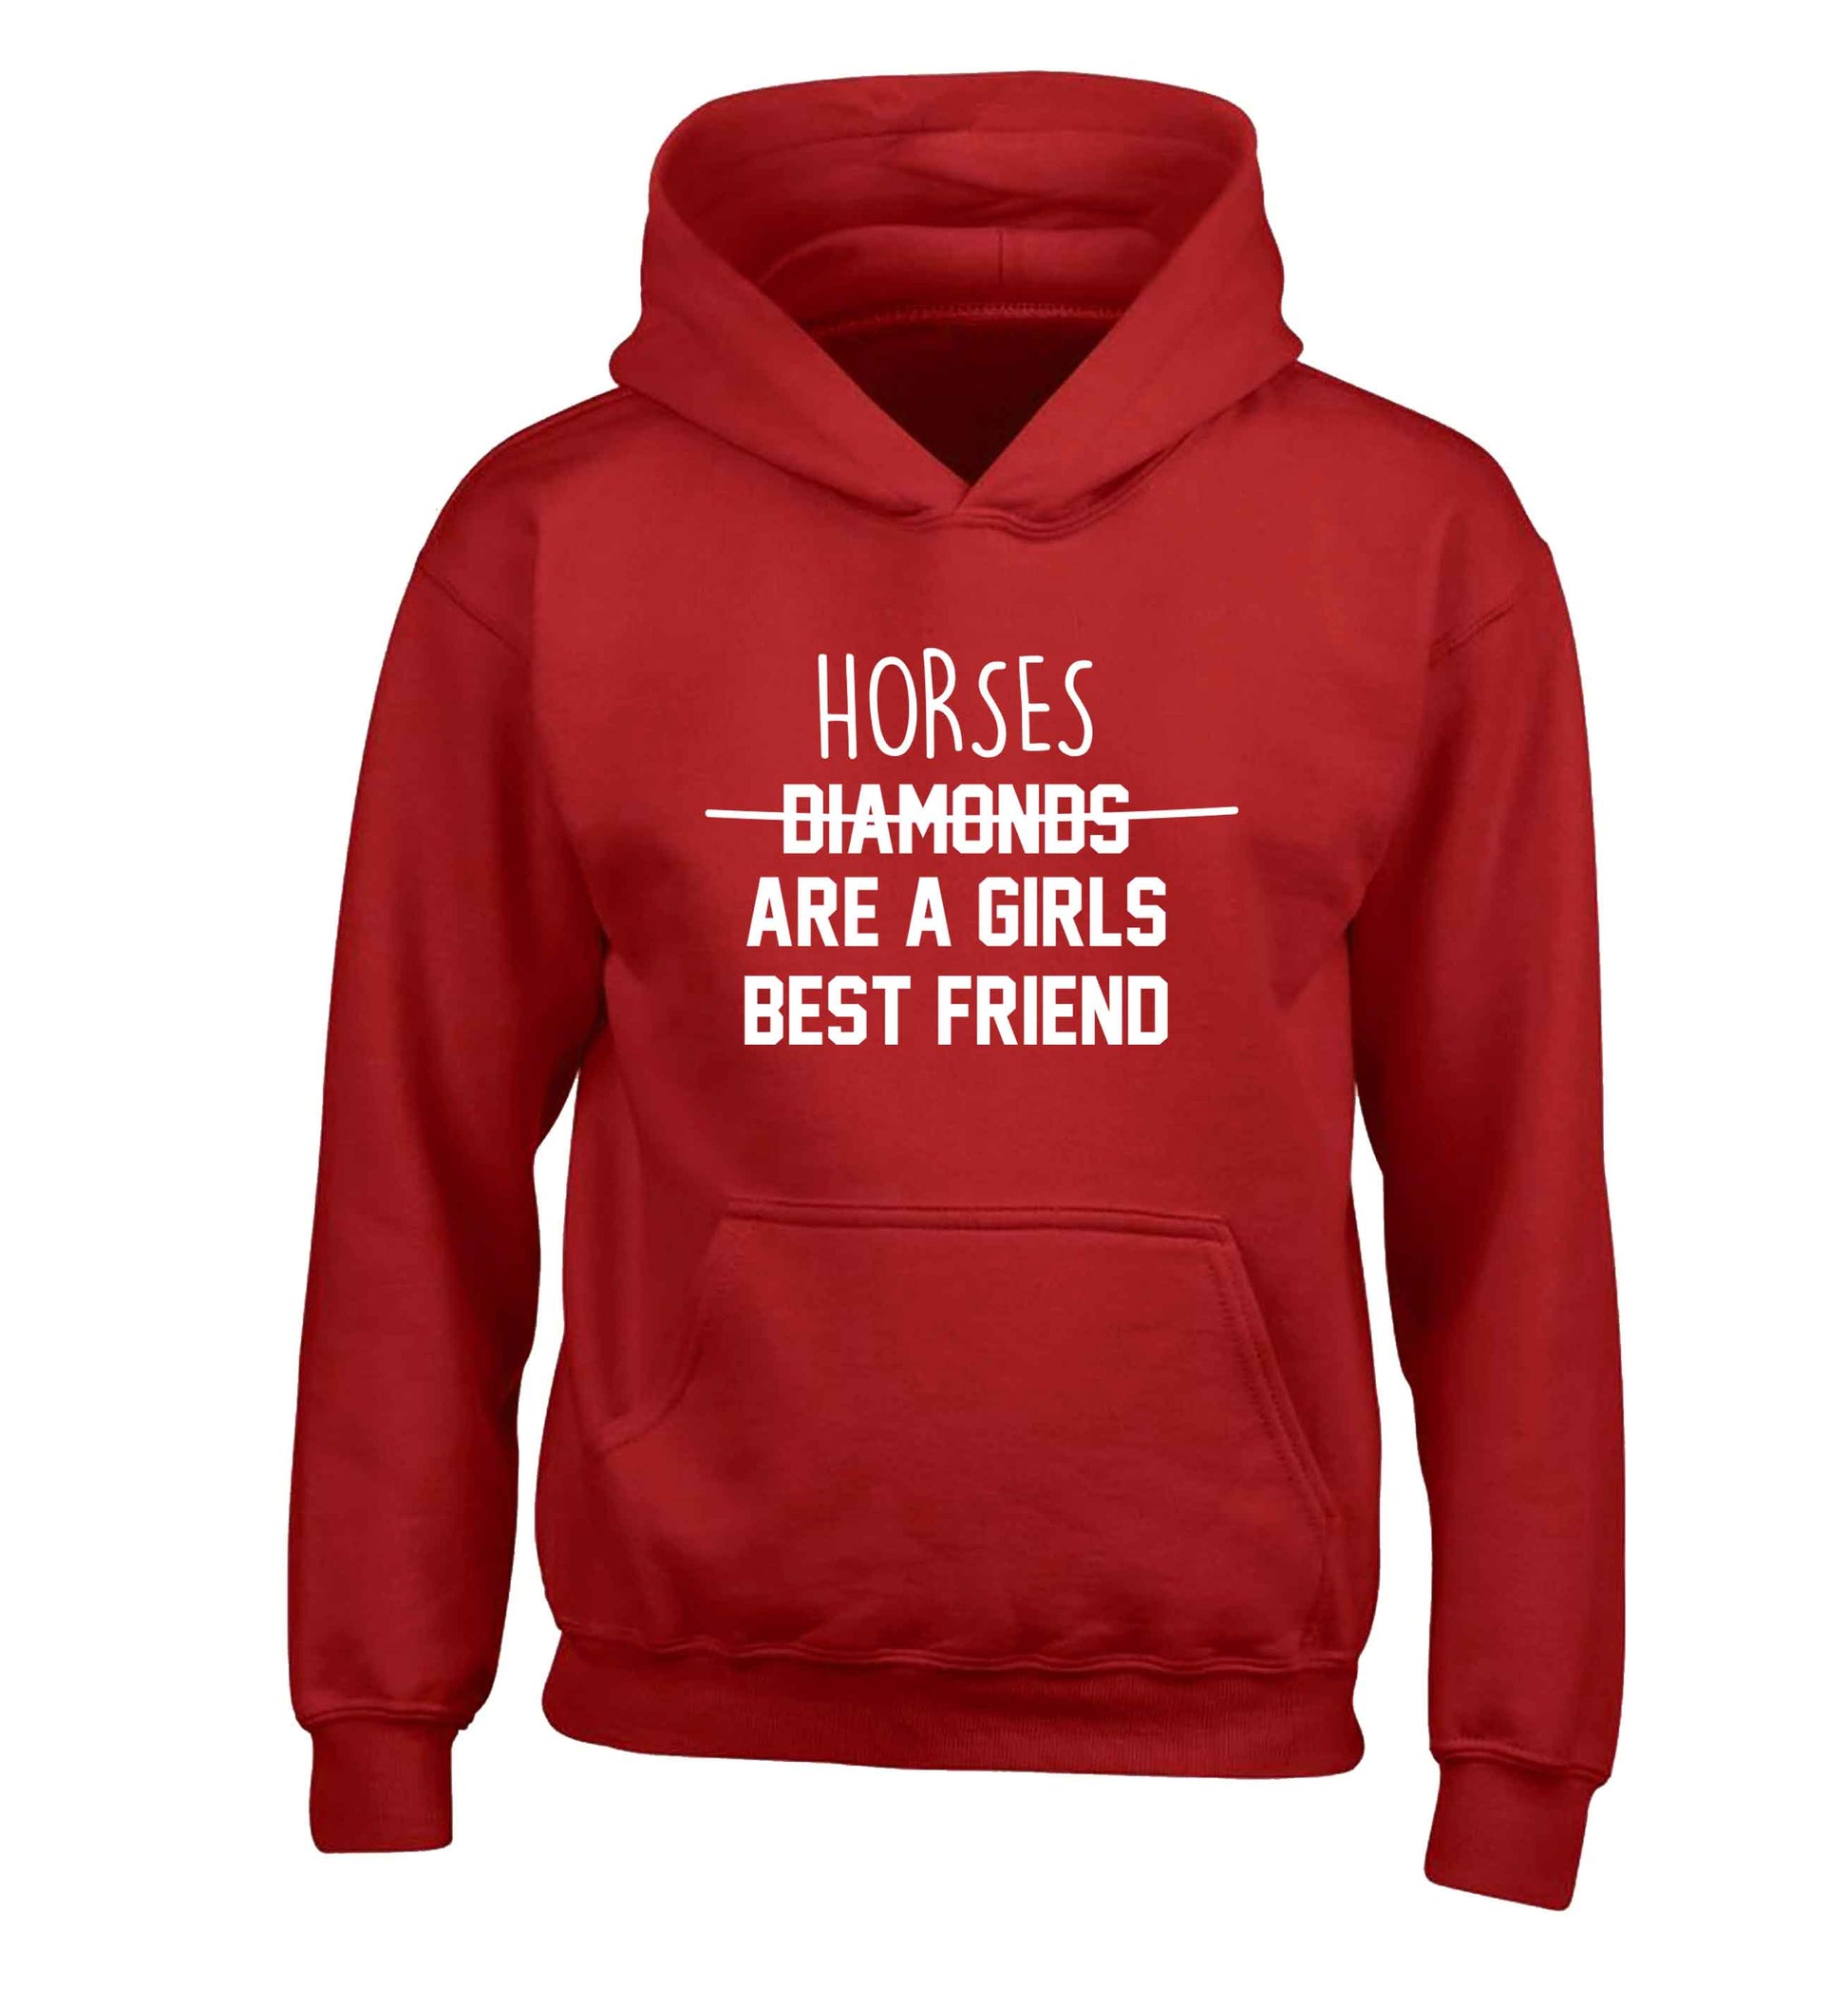 Horses are a girls best friend children's red hoodie 12-13 Years